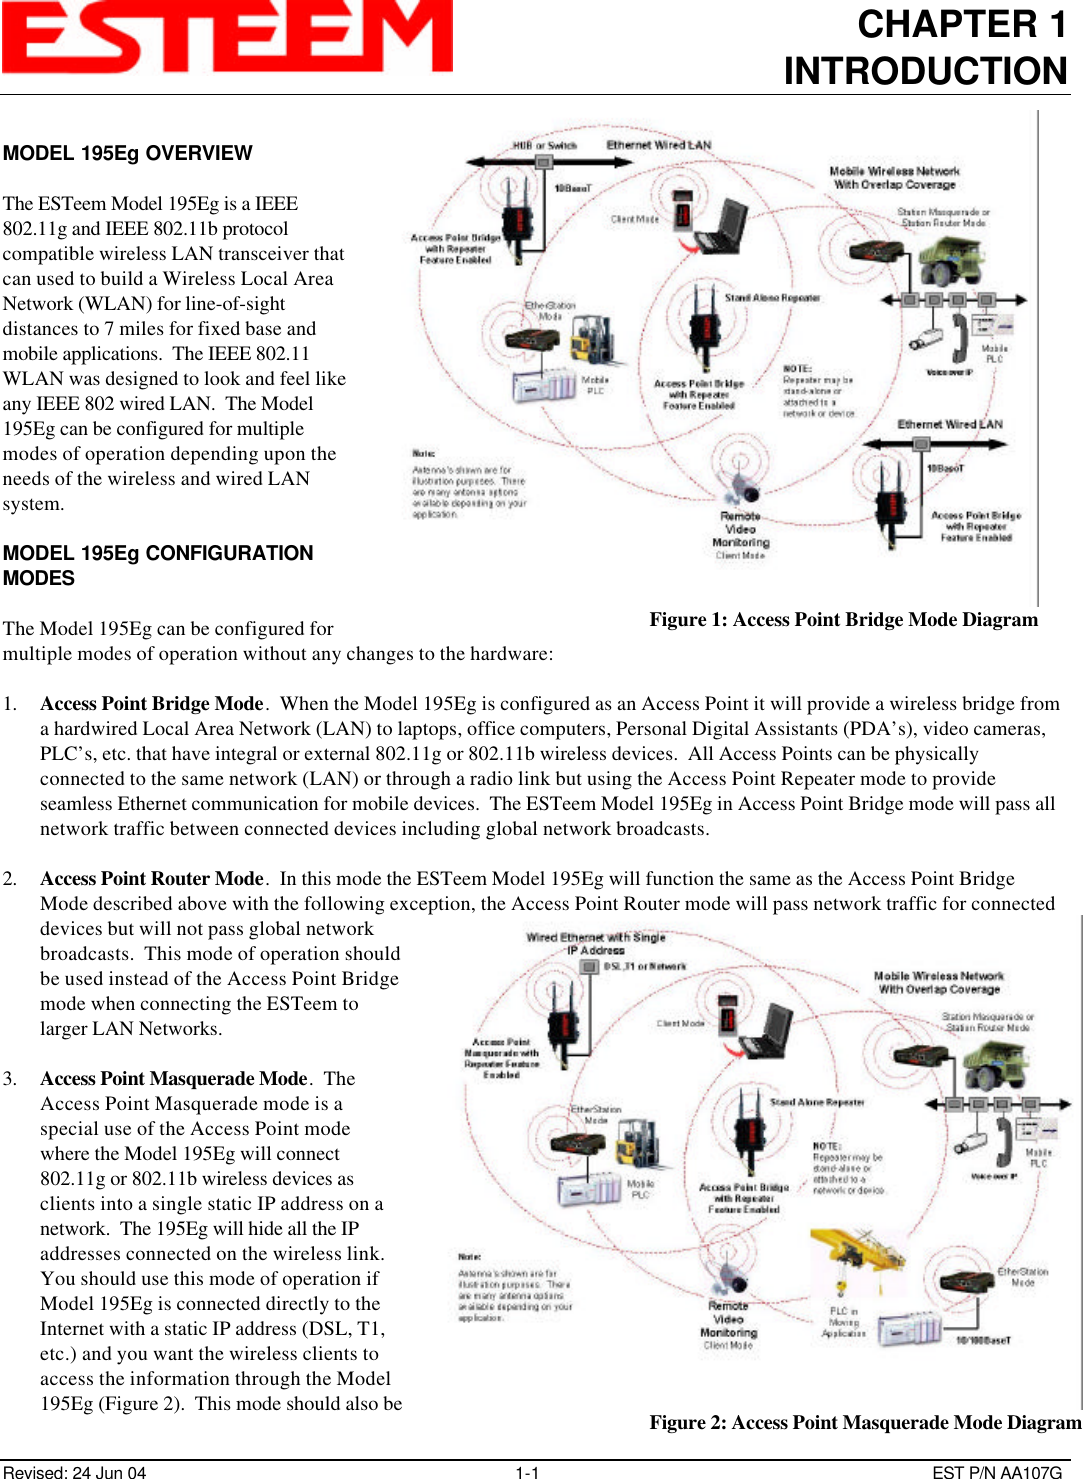 CHAPTER 1INTRODUCTIONRevised: 24 Jun 04 1-1EST P/N AA107GMODEL 195Eg OVERVIEWThe ESTeem Model 195Eg is a IEEE802.11g and IEEE 802.11b protocolcompatible wireless LAN transceiver thatcan used to build a Wireless Local AreaNetwork (WLAN) for line-of-sightdistances to 7 miles for fixed base andmobile applications.  The IEEE 802.11WLAN was designed to look and feel likeany IEEE 802 wired LAN.  The Model195Eg can be configured for multiplemodes of operation depending upon theneeds of the wireless and wired LANsystem.MODEL 195Eg CONFIGURATIONMODESThe Model 195Eg can be configured formultiple modes of operation without any changes to the hardware:1. Access Point Bridge Mode.  When the Model 195Eg is configured as an Access Point it will provide a wireless bridge froma hardwired Local Area Network (LAN) to laptops, office computers, Personal Digital Assistants (PDA’s), video cameras,PLC’s, etc. that have integral or external 802.11g or 802.11b wireless devices.  All Access Points can be physicallyconnected to the same network (LAN) or through a radio link but using the Access Point Repeater mode to provideseamless Ethernet communication for mobile devices.  The ESTeem Model 195Eg in Access Point Bridge mode will pass allnetwork traffic between connected devices including global network broadcasts.2. Access Point Router Mode.  In this mode the ESTeem Model 195Eg will function the same as the Access Point BridgeMode described above with the following exception, the Access Point Router mode will pass network traffic for connecteddevices but will not pass global networkbroadcasts.  This mode of operation shouldbe used instead of the Access Point Bridgemode when connecting the ESTeem tolarger LAN Networks.3. Access Point Masquerade Mode.  TheAccess Point Masquerade mode is aspecial use of the Access Point modewhere the Model 195Eg will connect802.11g or 802.11b wireless devices asclients into a single static IP address on anetwork.  The 195Eg will hide all the IPaddresses connected on the wireless link. You should use this mode of operation ifModel 195Eg is connected directly to theInternet with a static IP address (DSL, T1,etc.) and you want the wireless clients toaccess the information through the Model195Eg (Figure 2).  This mode should also beFigure 1: Access Point Bridge Mode DiagramFigure 2: Access Point Masquerade Mode Diagram